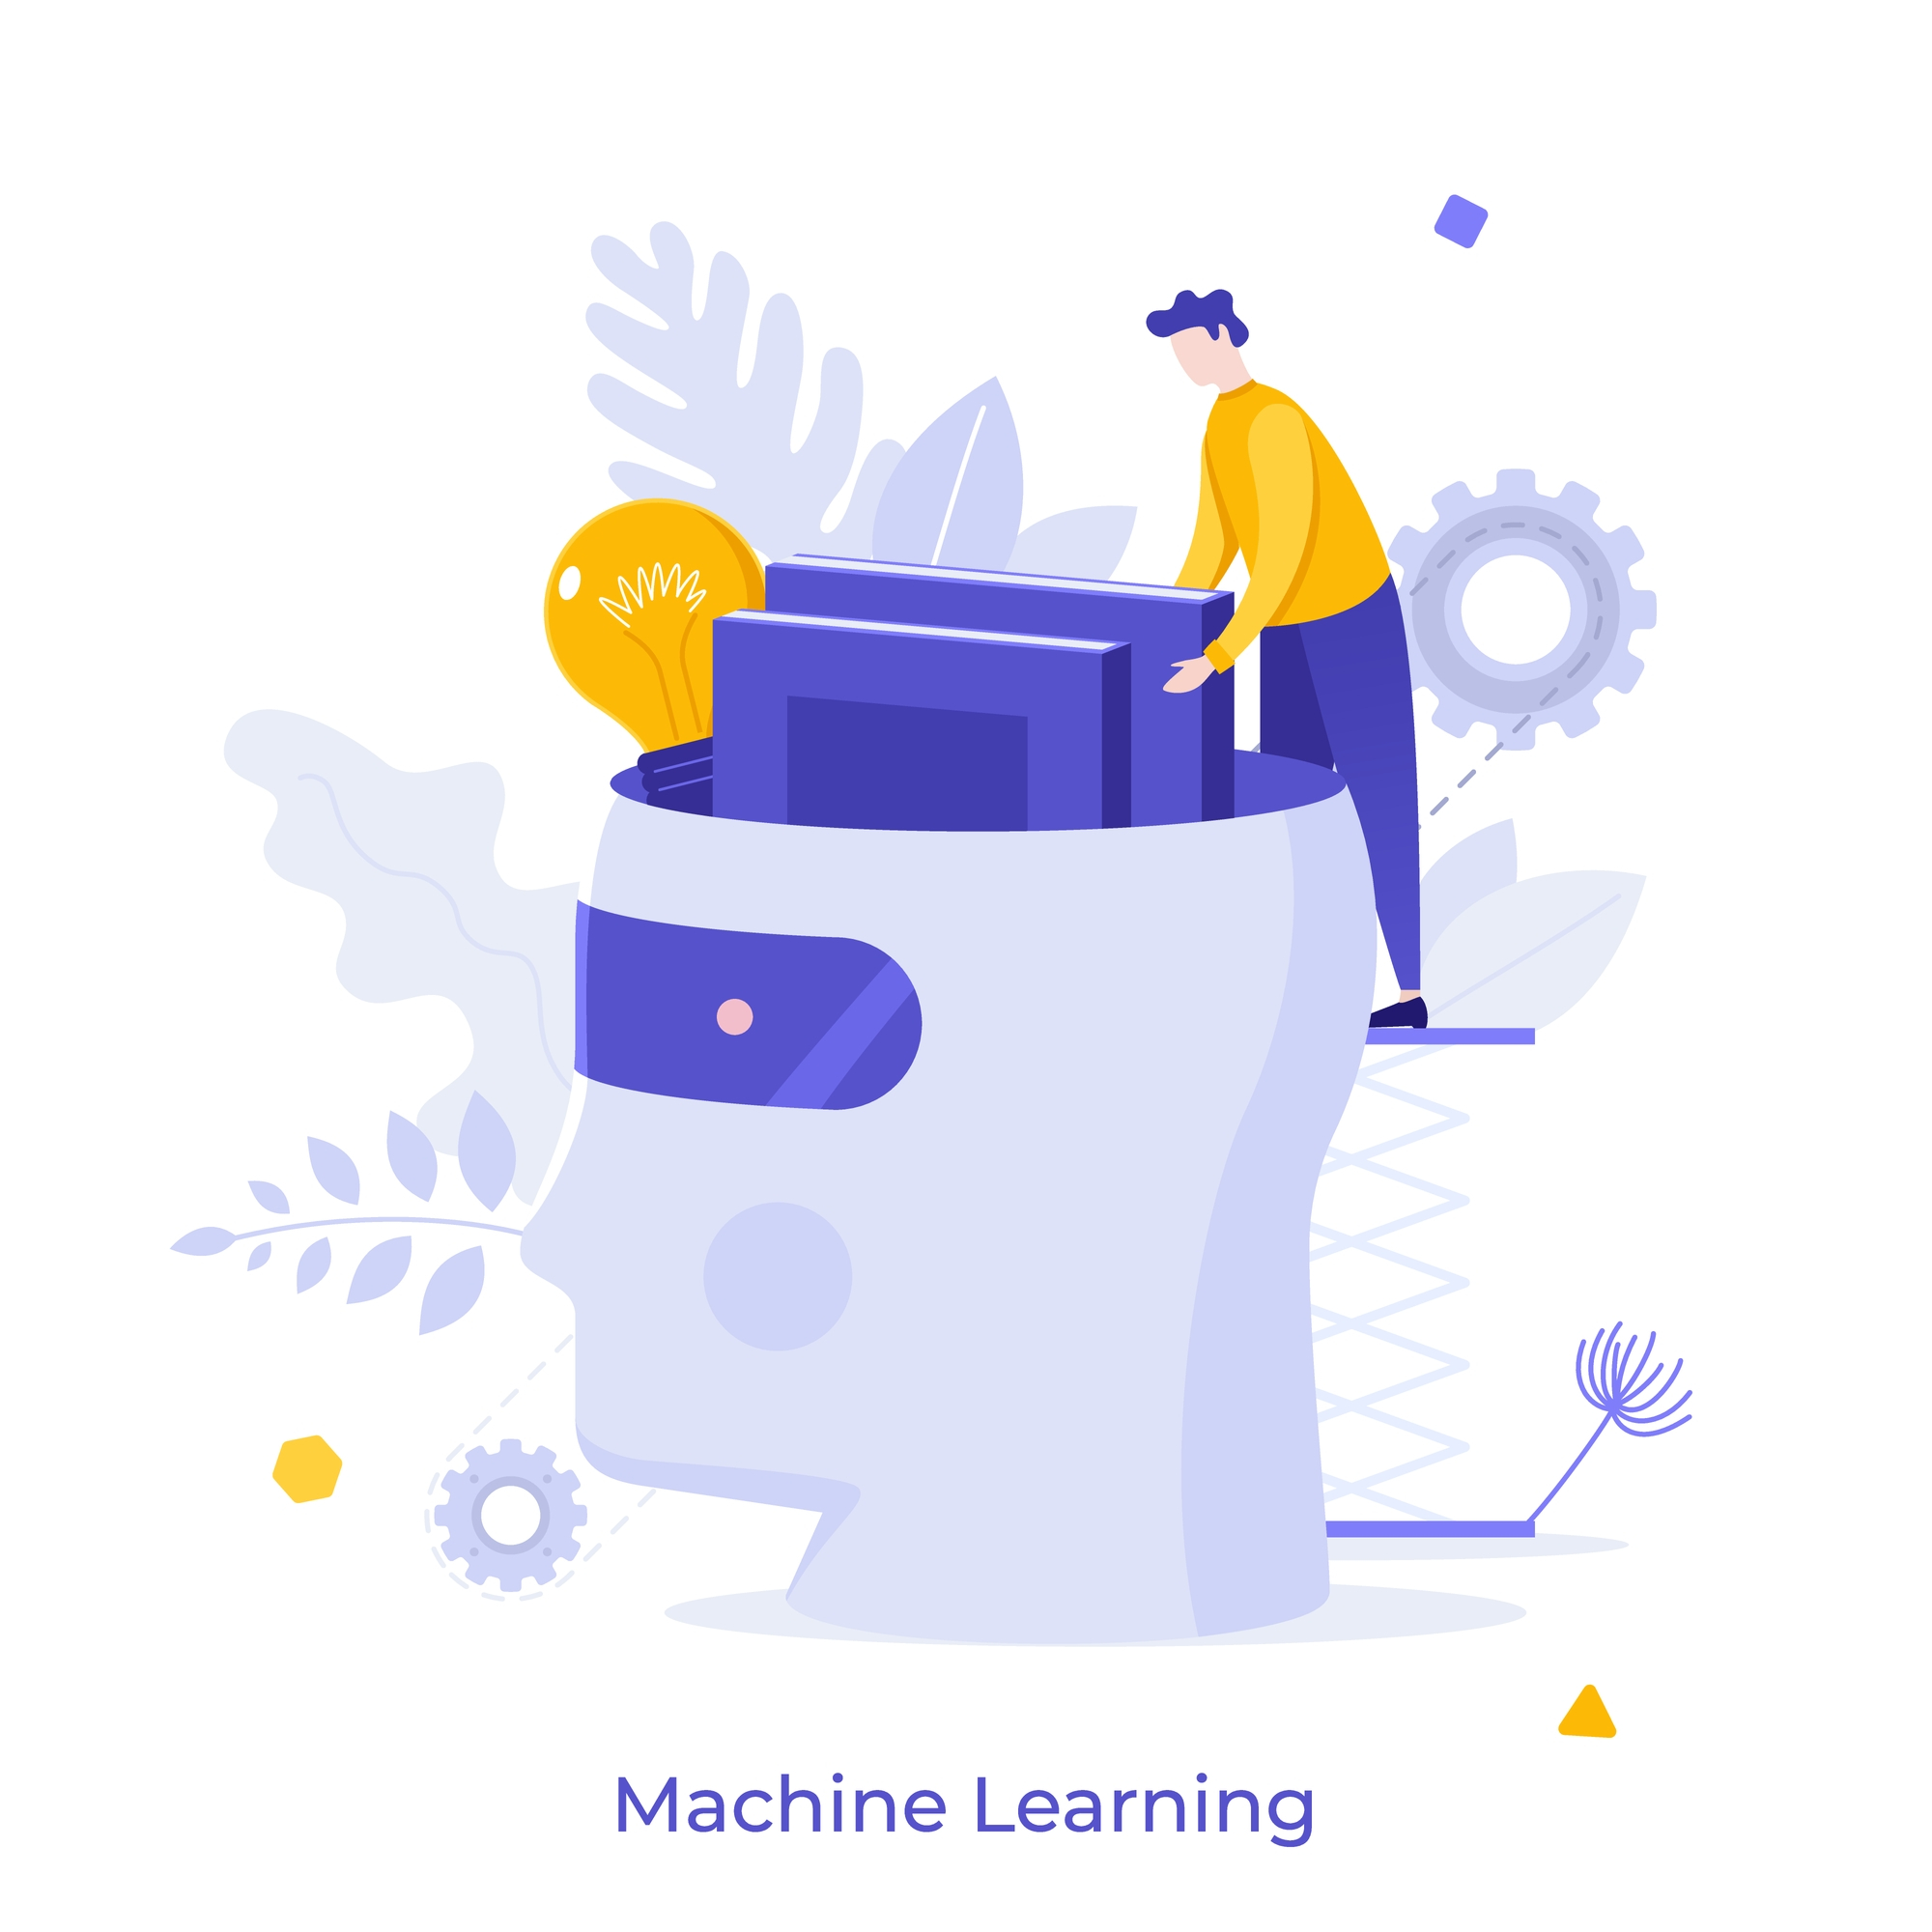 “Machine Learning” September 2021 — summary from Astrophysics Data System and Wiley Online Library main image